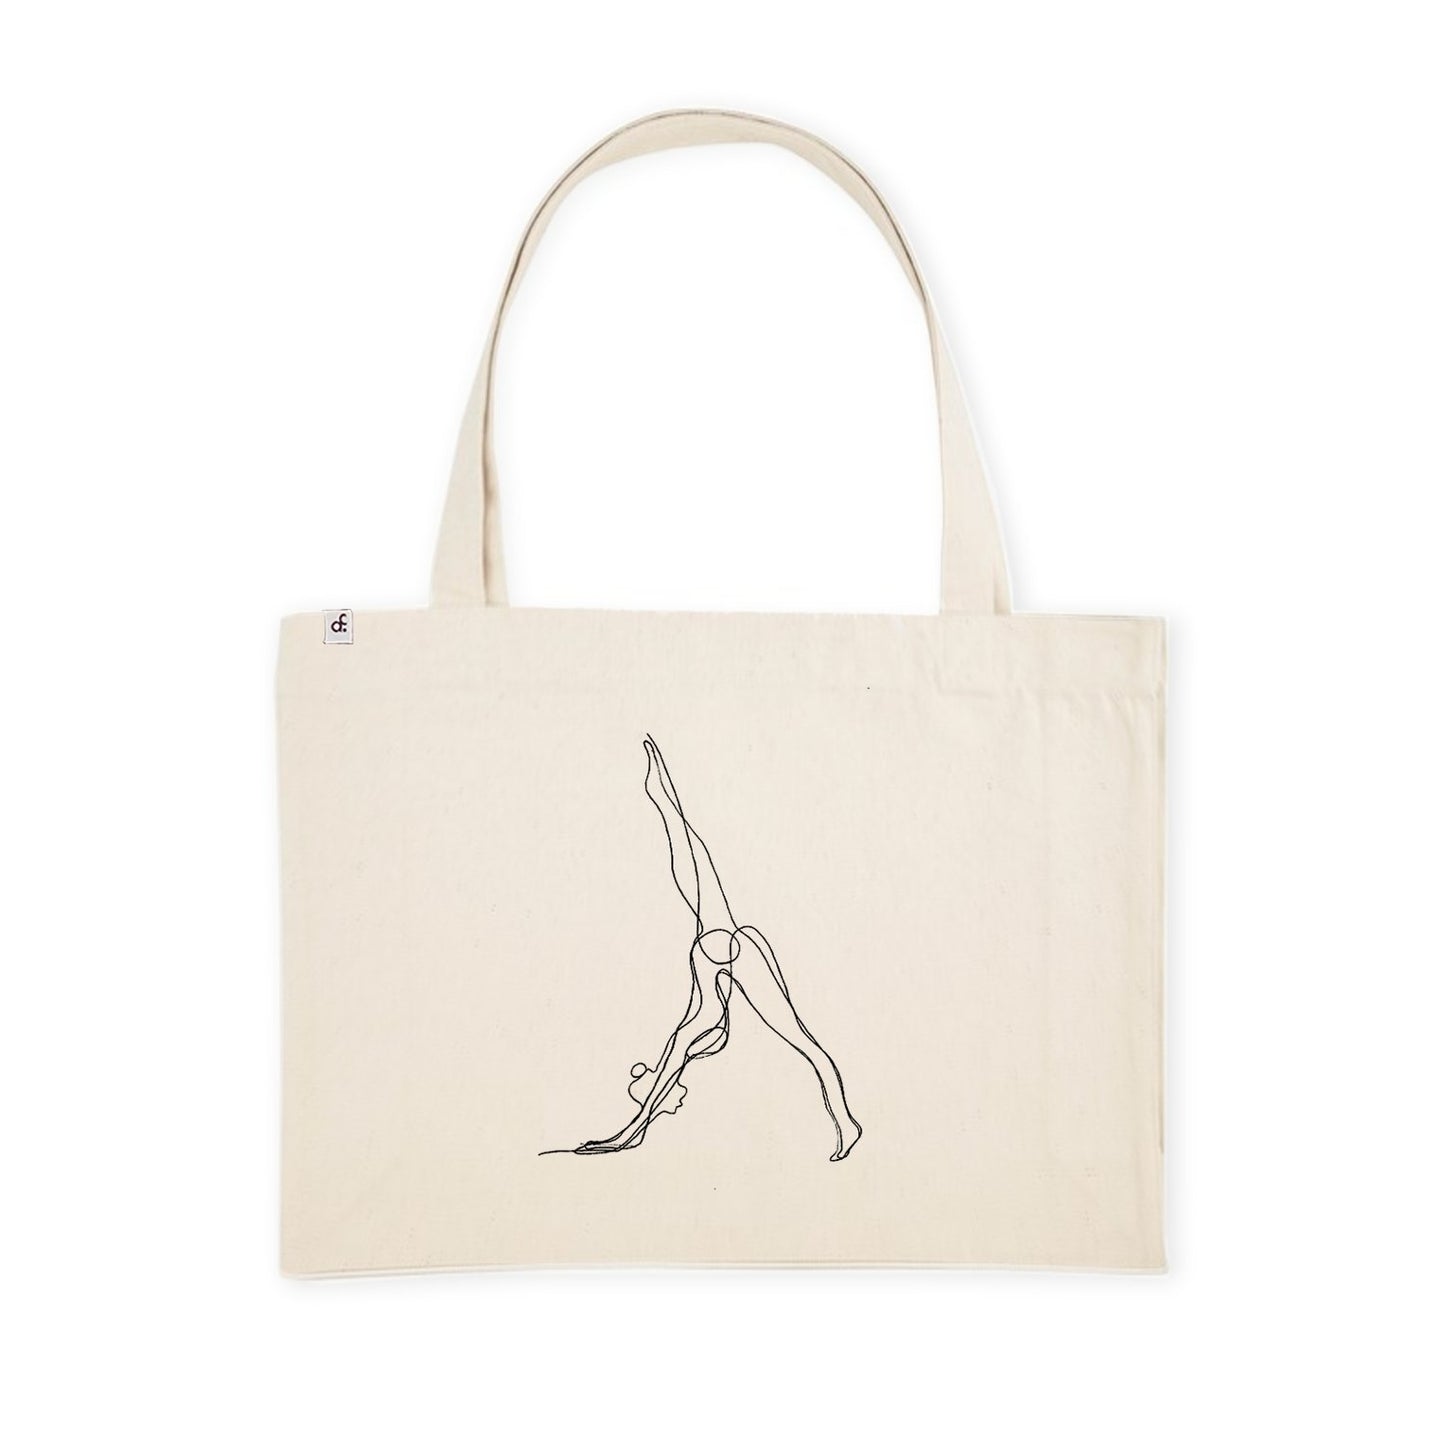 Abstract Downdog Yoga Pose Oversized Tote Bag - Actively Conscious